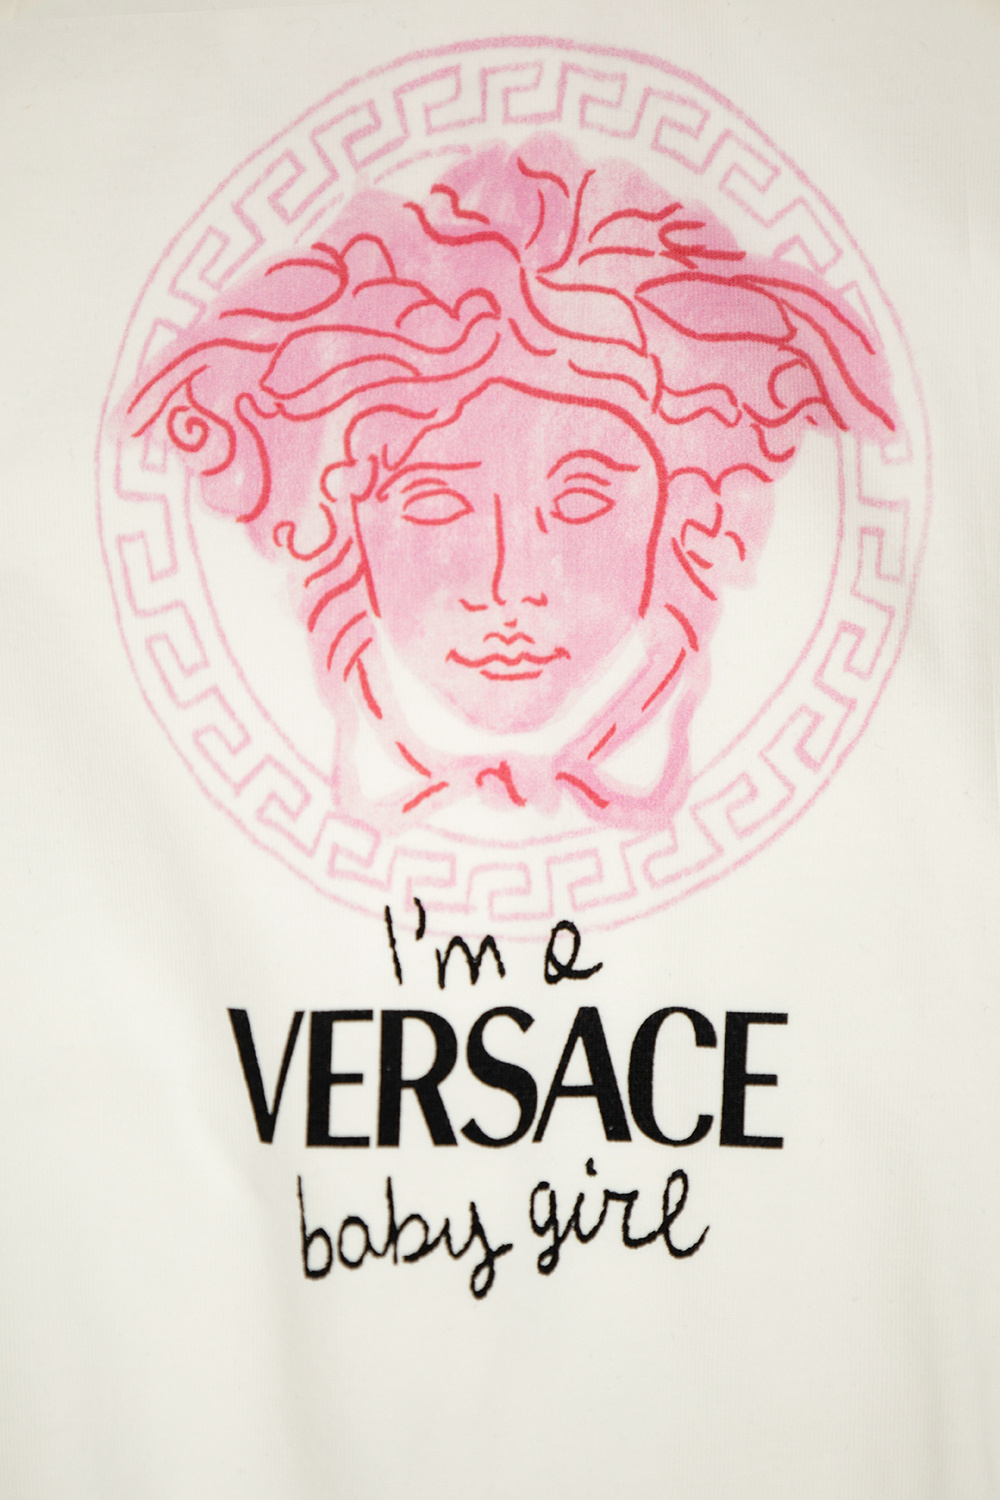 Versace Kids A history of the brand